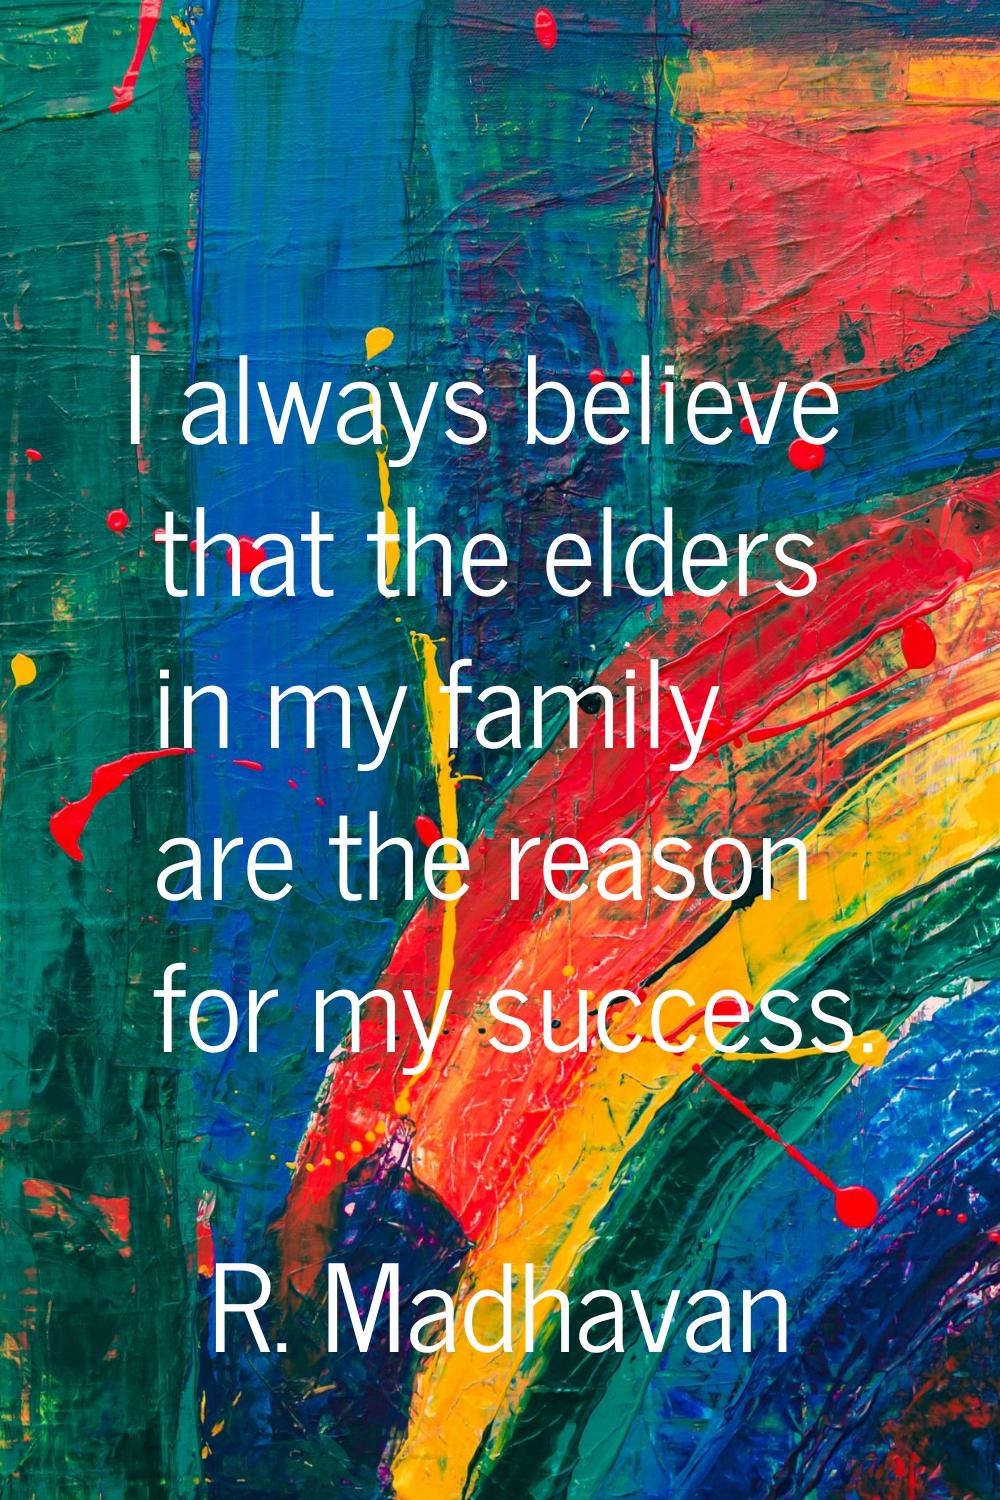 I always believe that the elders in my family are the reason for my success.